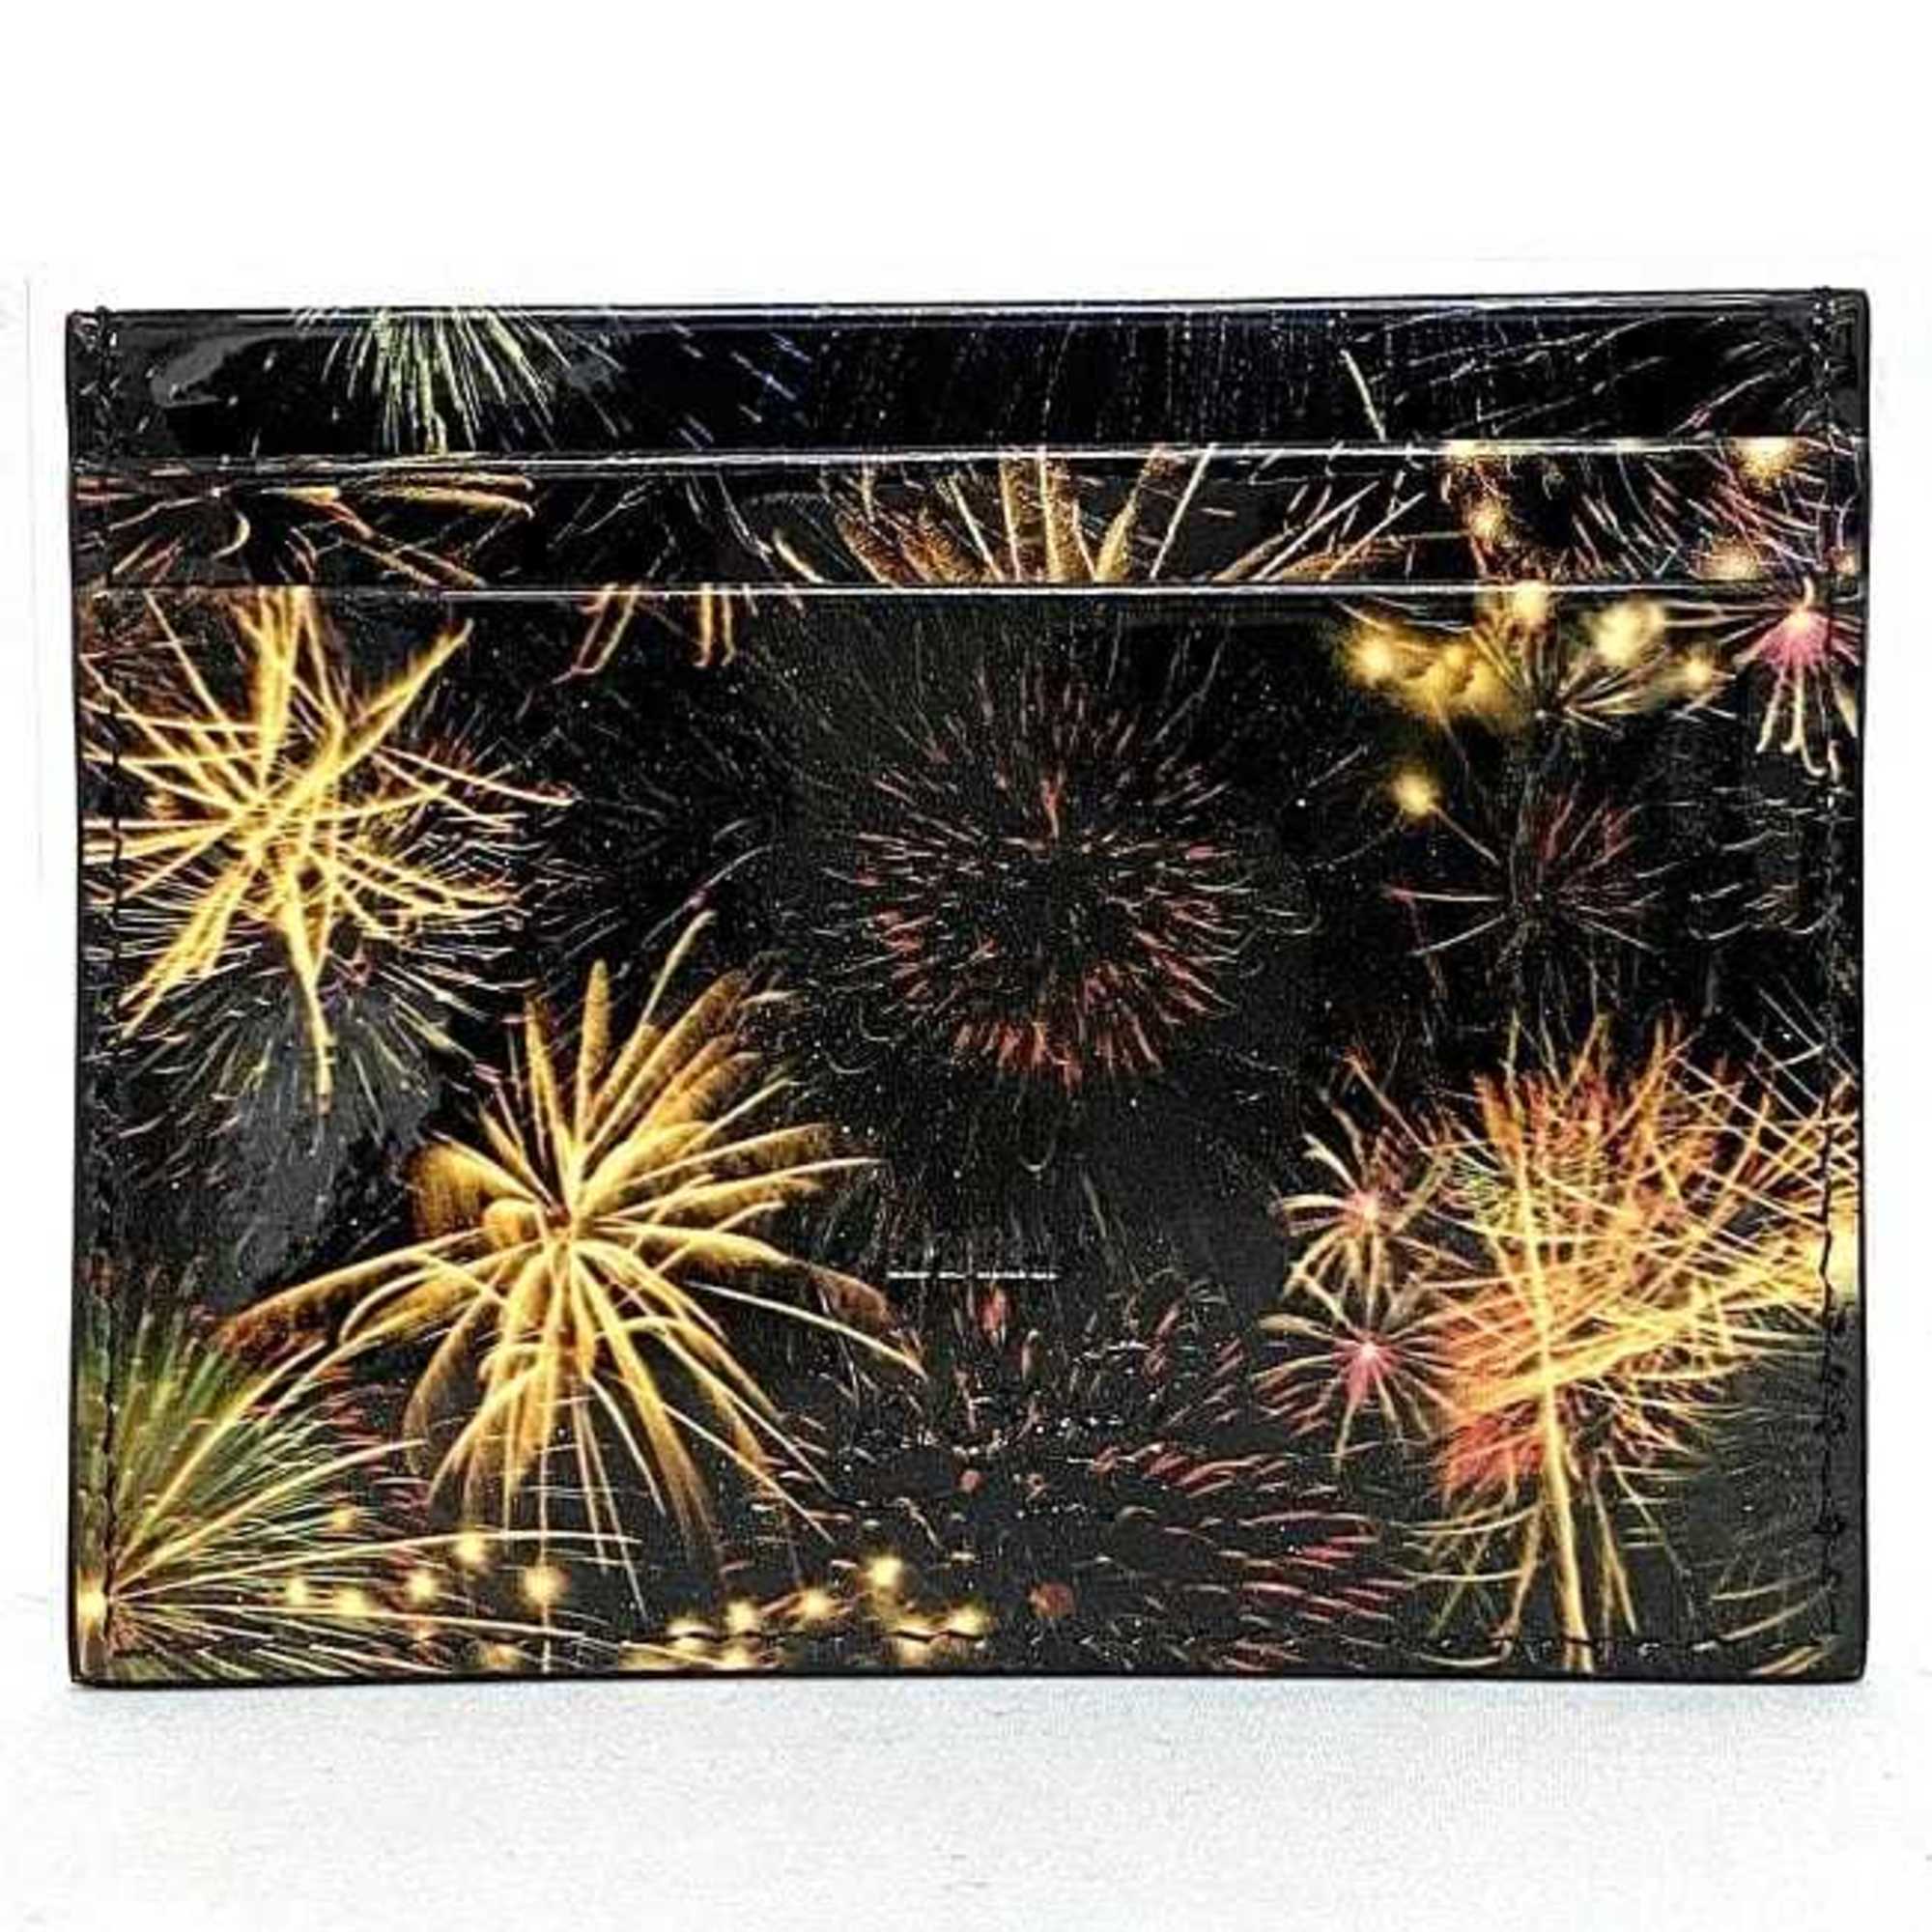 Christian Louboutin Card Case Black Gold Multicolor Fireworks Coating Leather Holder Pass Studs Women's